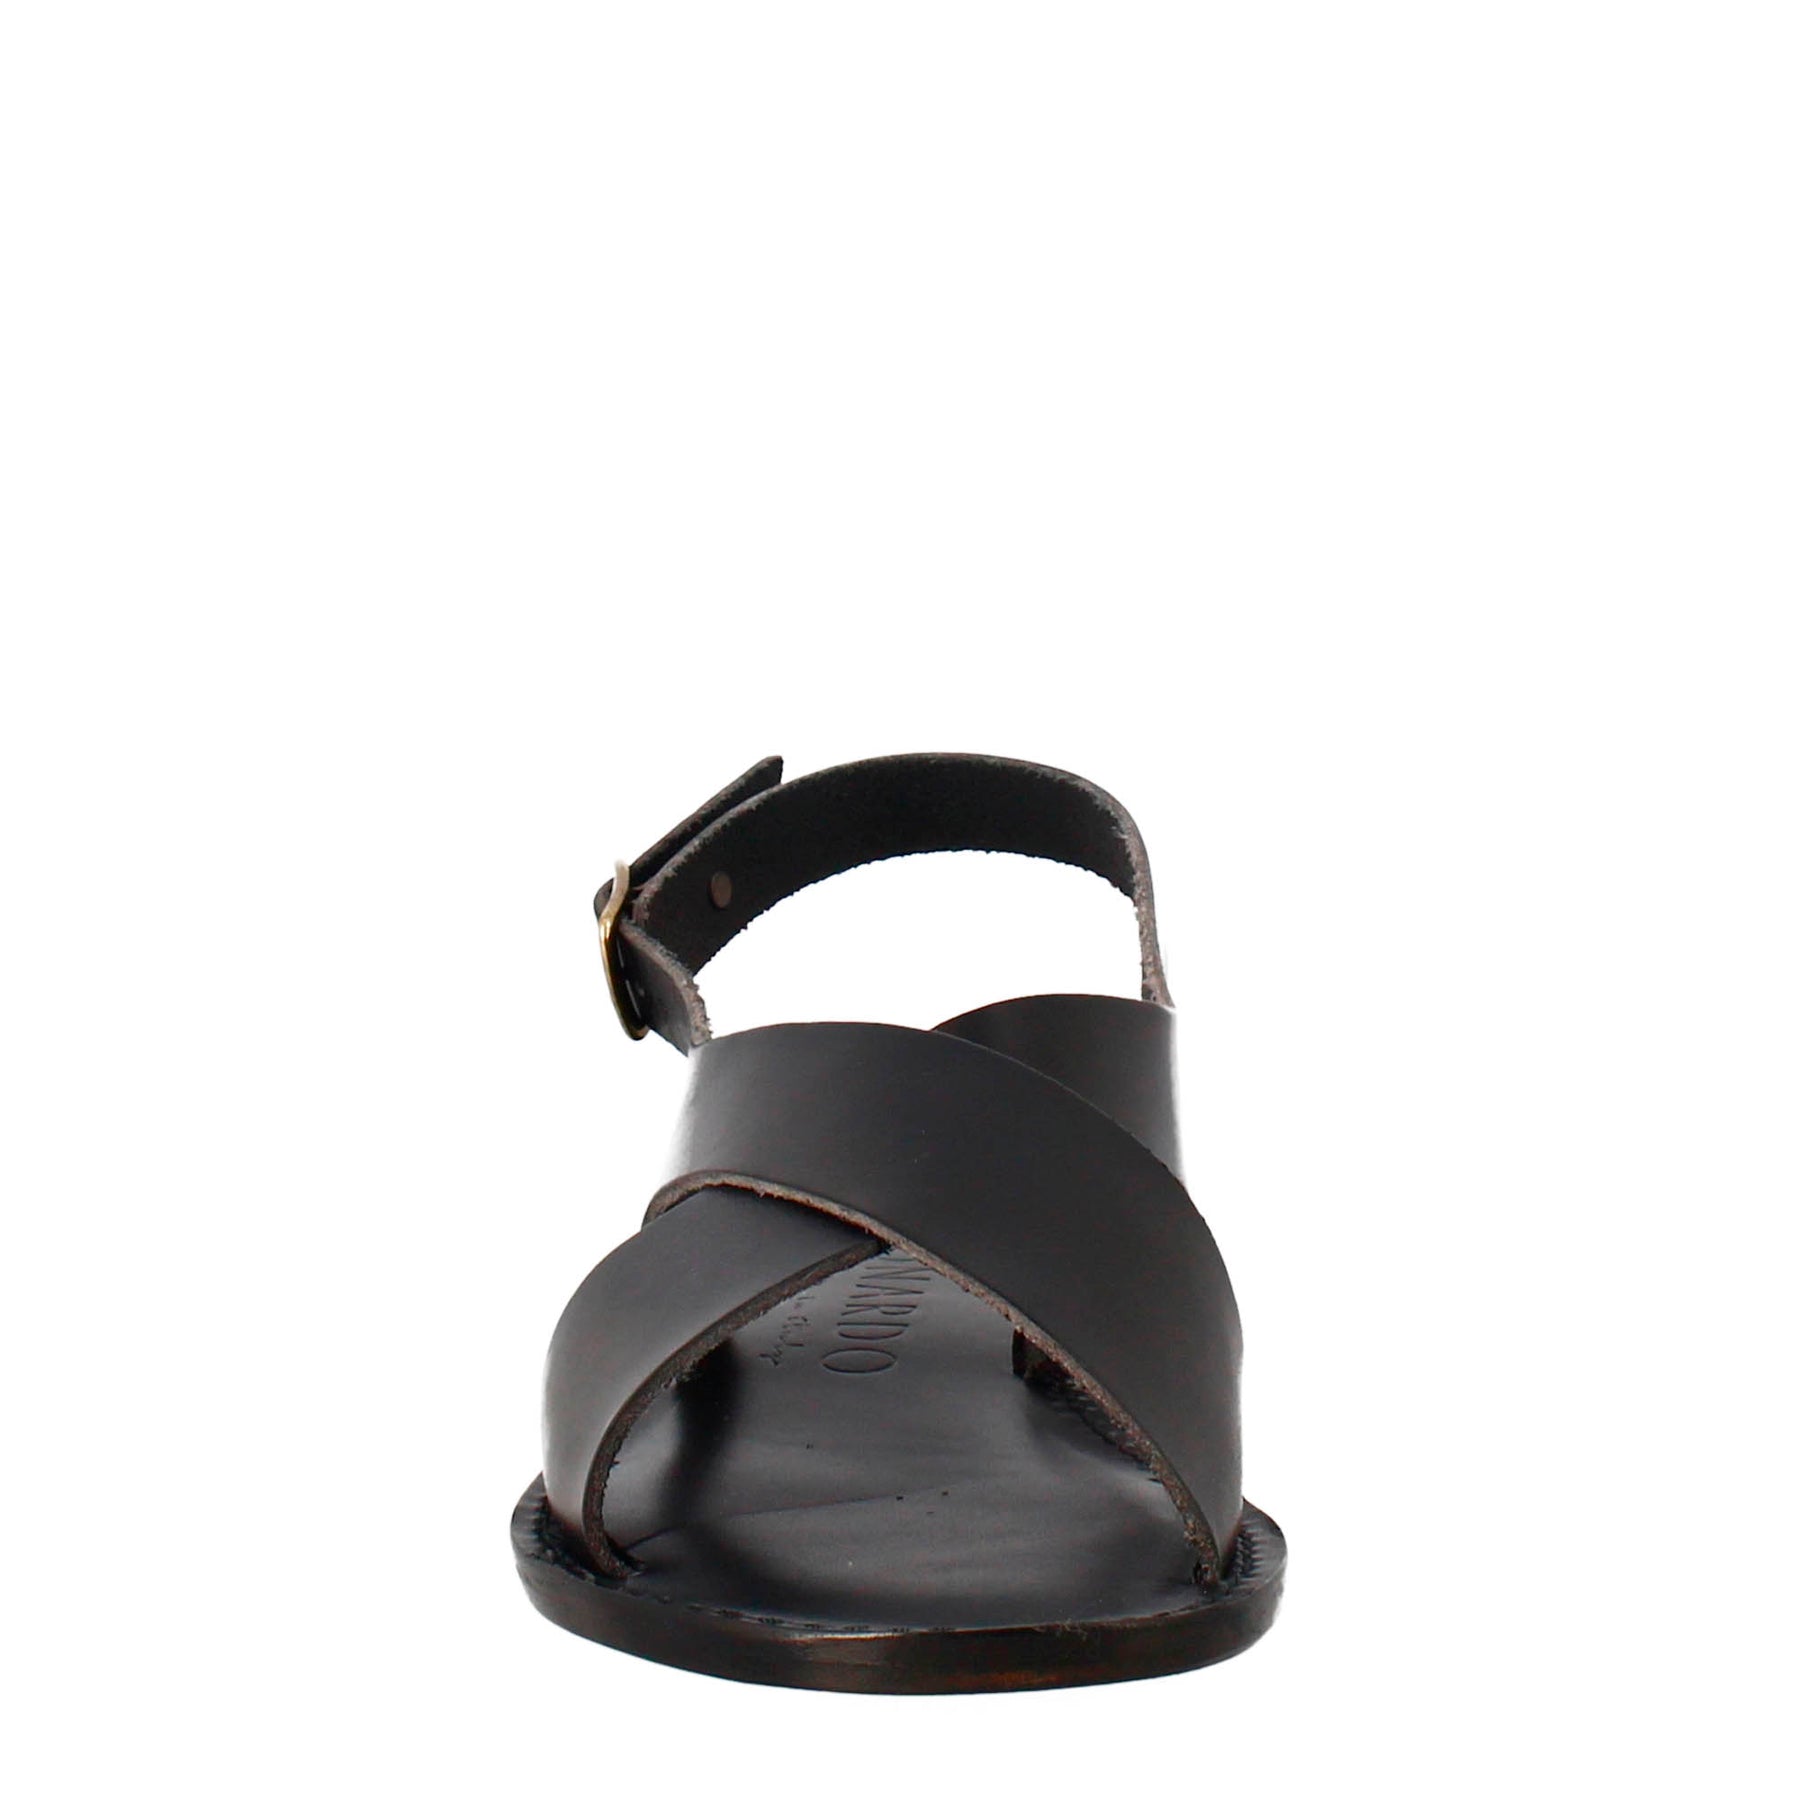 Arcadia women's sandals in ancient Roman style in black leather 